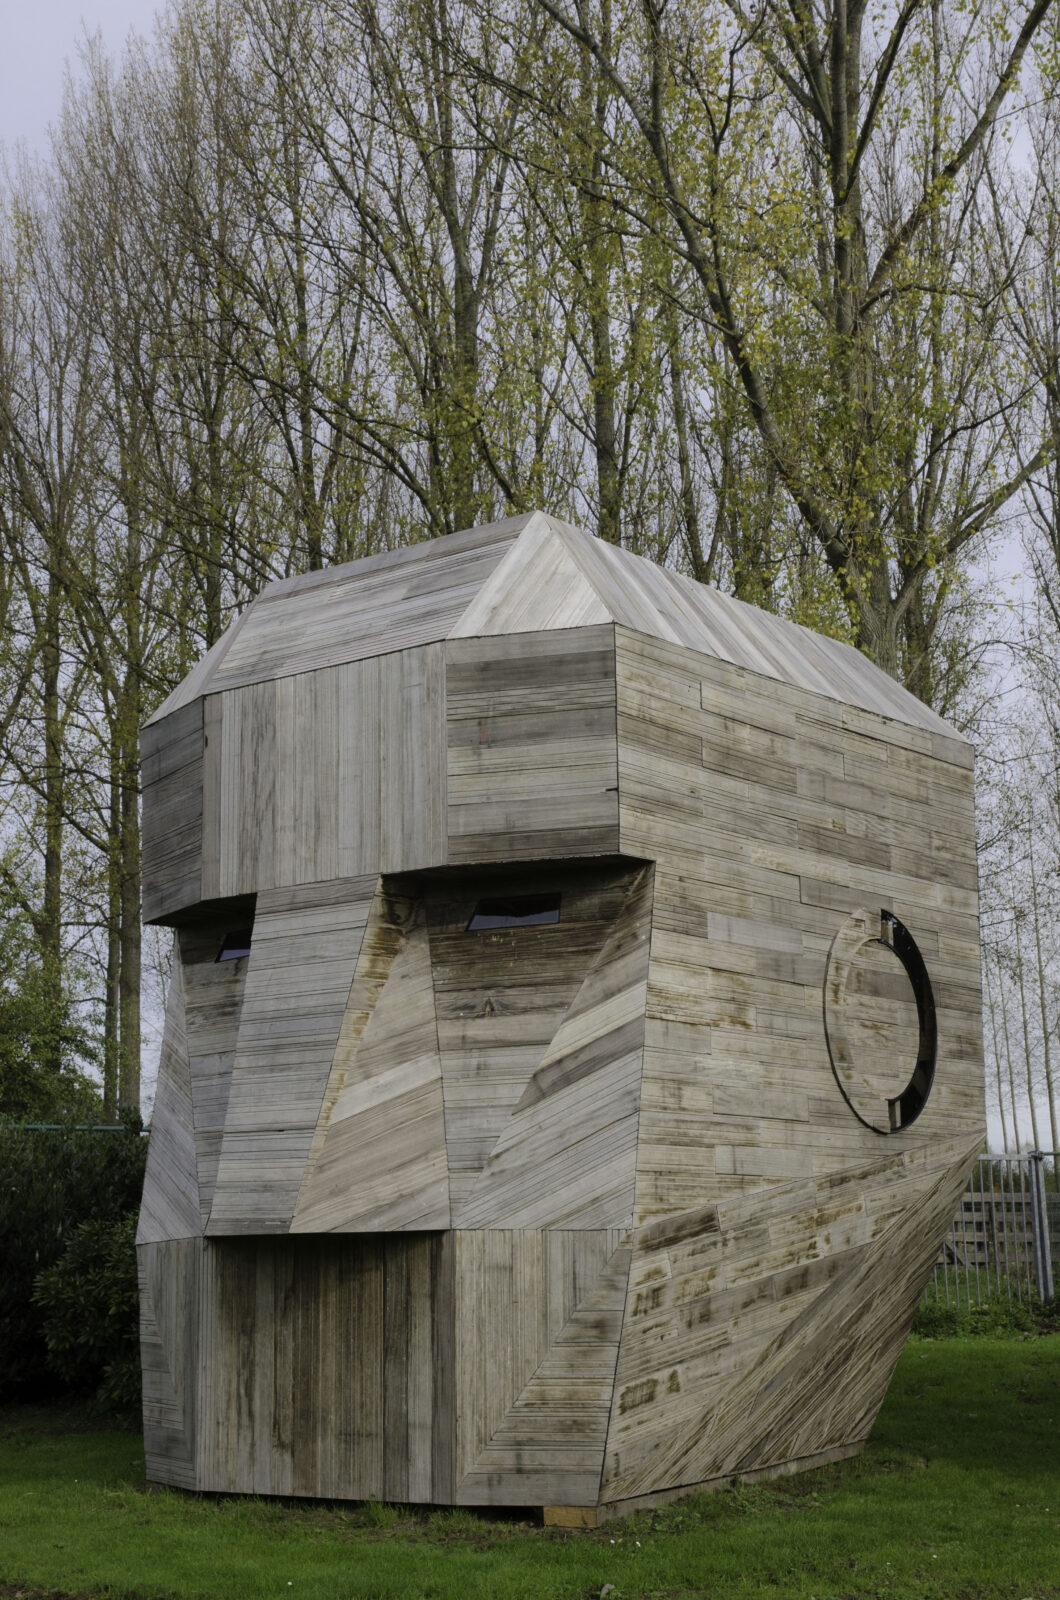 Frits Jeuris, Think a Head, hout, 2014